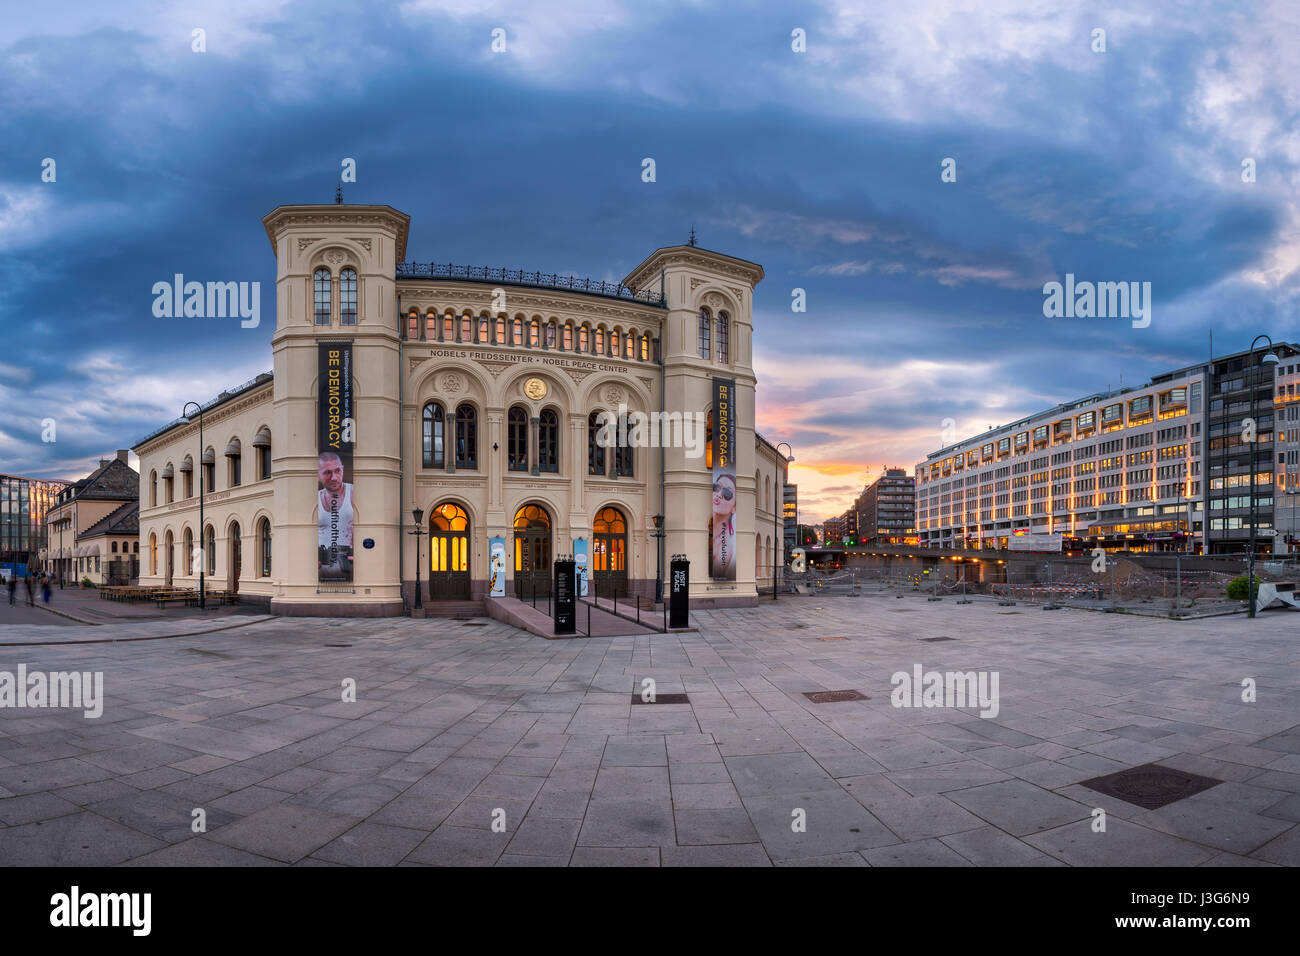 OSLO, NORWAY - JUNE 12, 2014: Panorama of Nobel Peace Center in Oslo. The Nobel Peace Center was opened in 2005 by His Majesty King Harald V of Norway Stock Photo